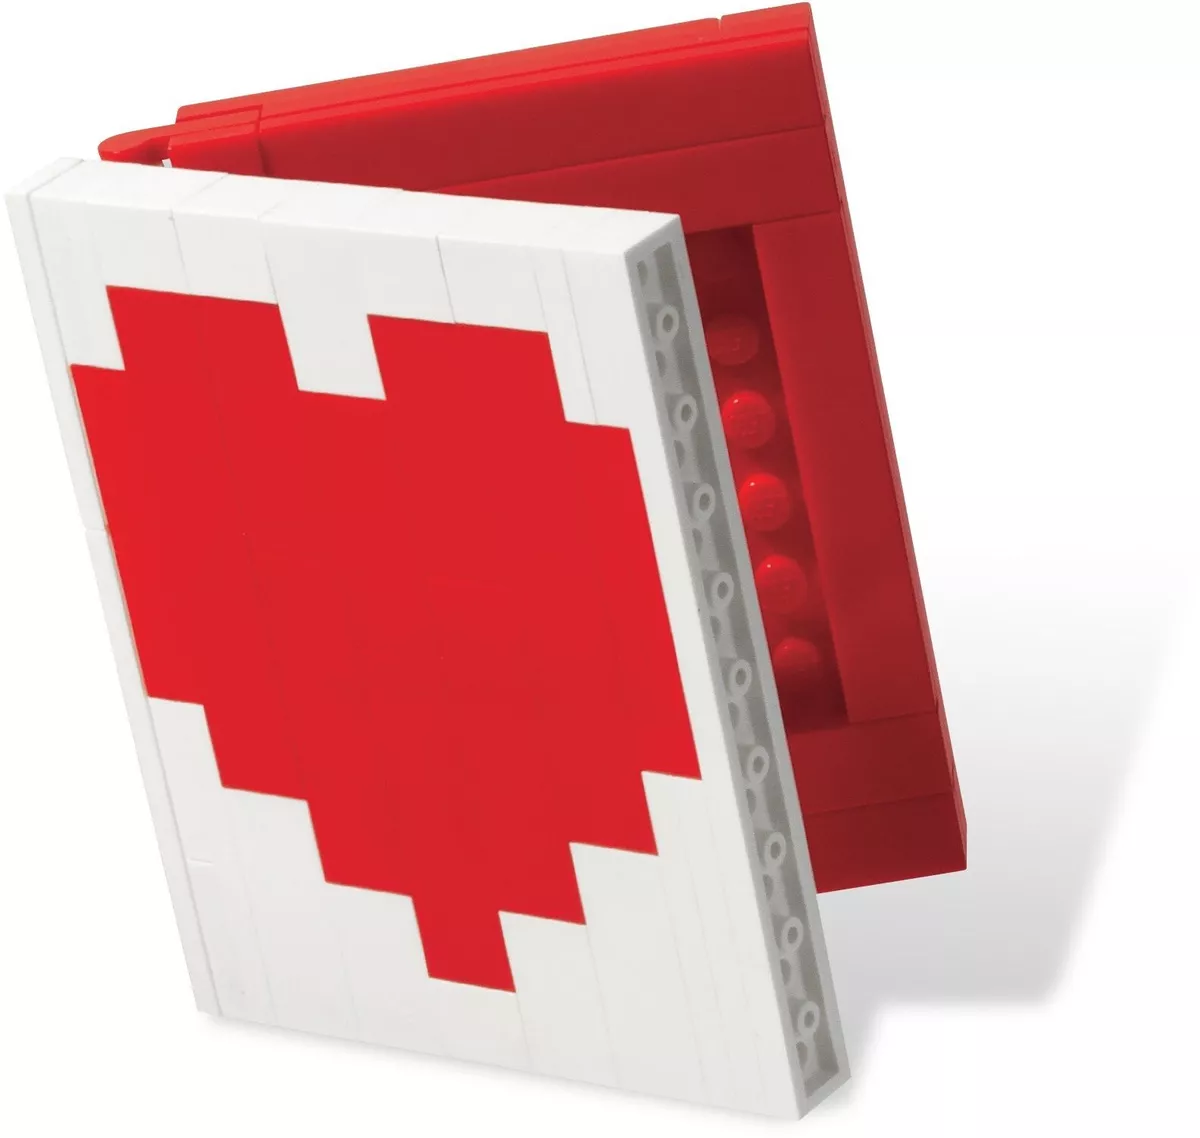  LEGO Heart Book 40015 Valentines Day : Toys & Games